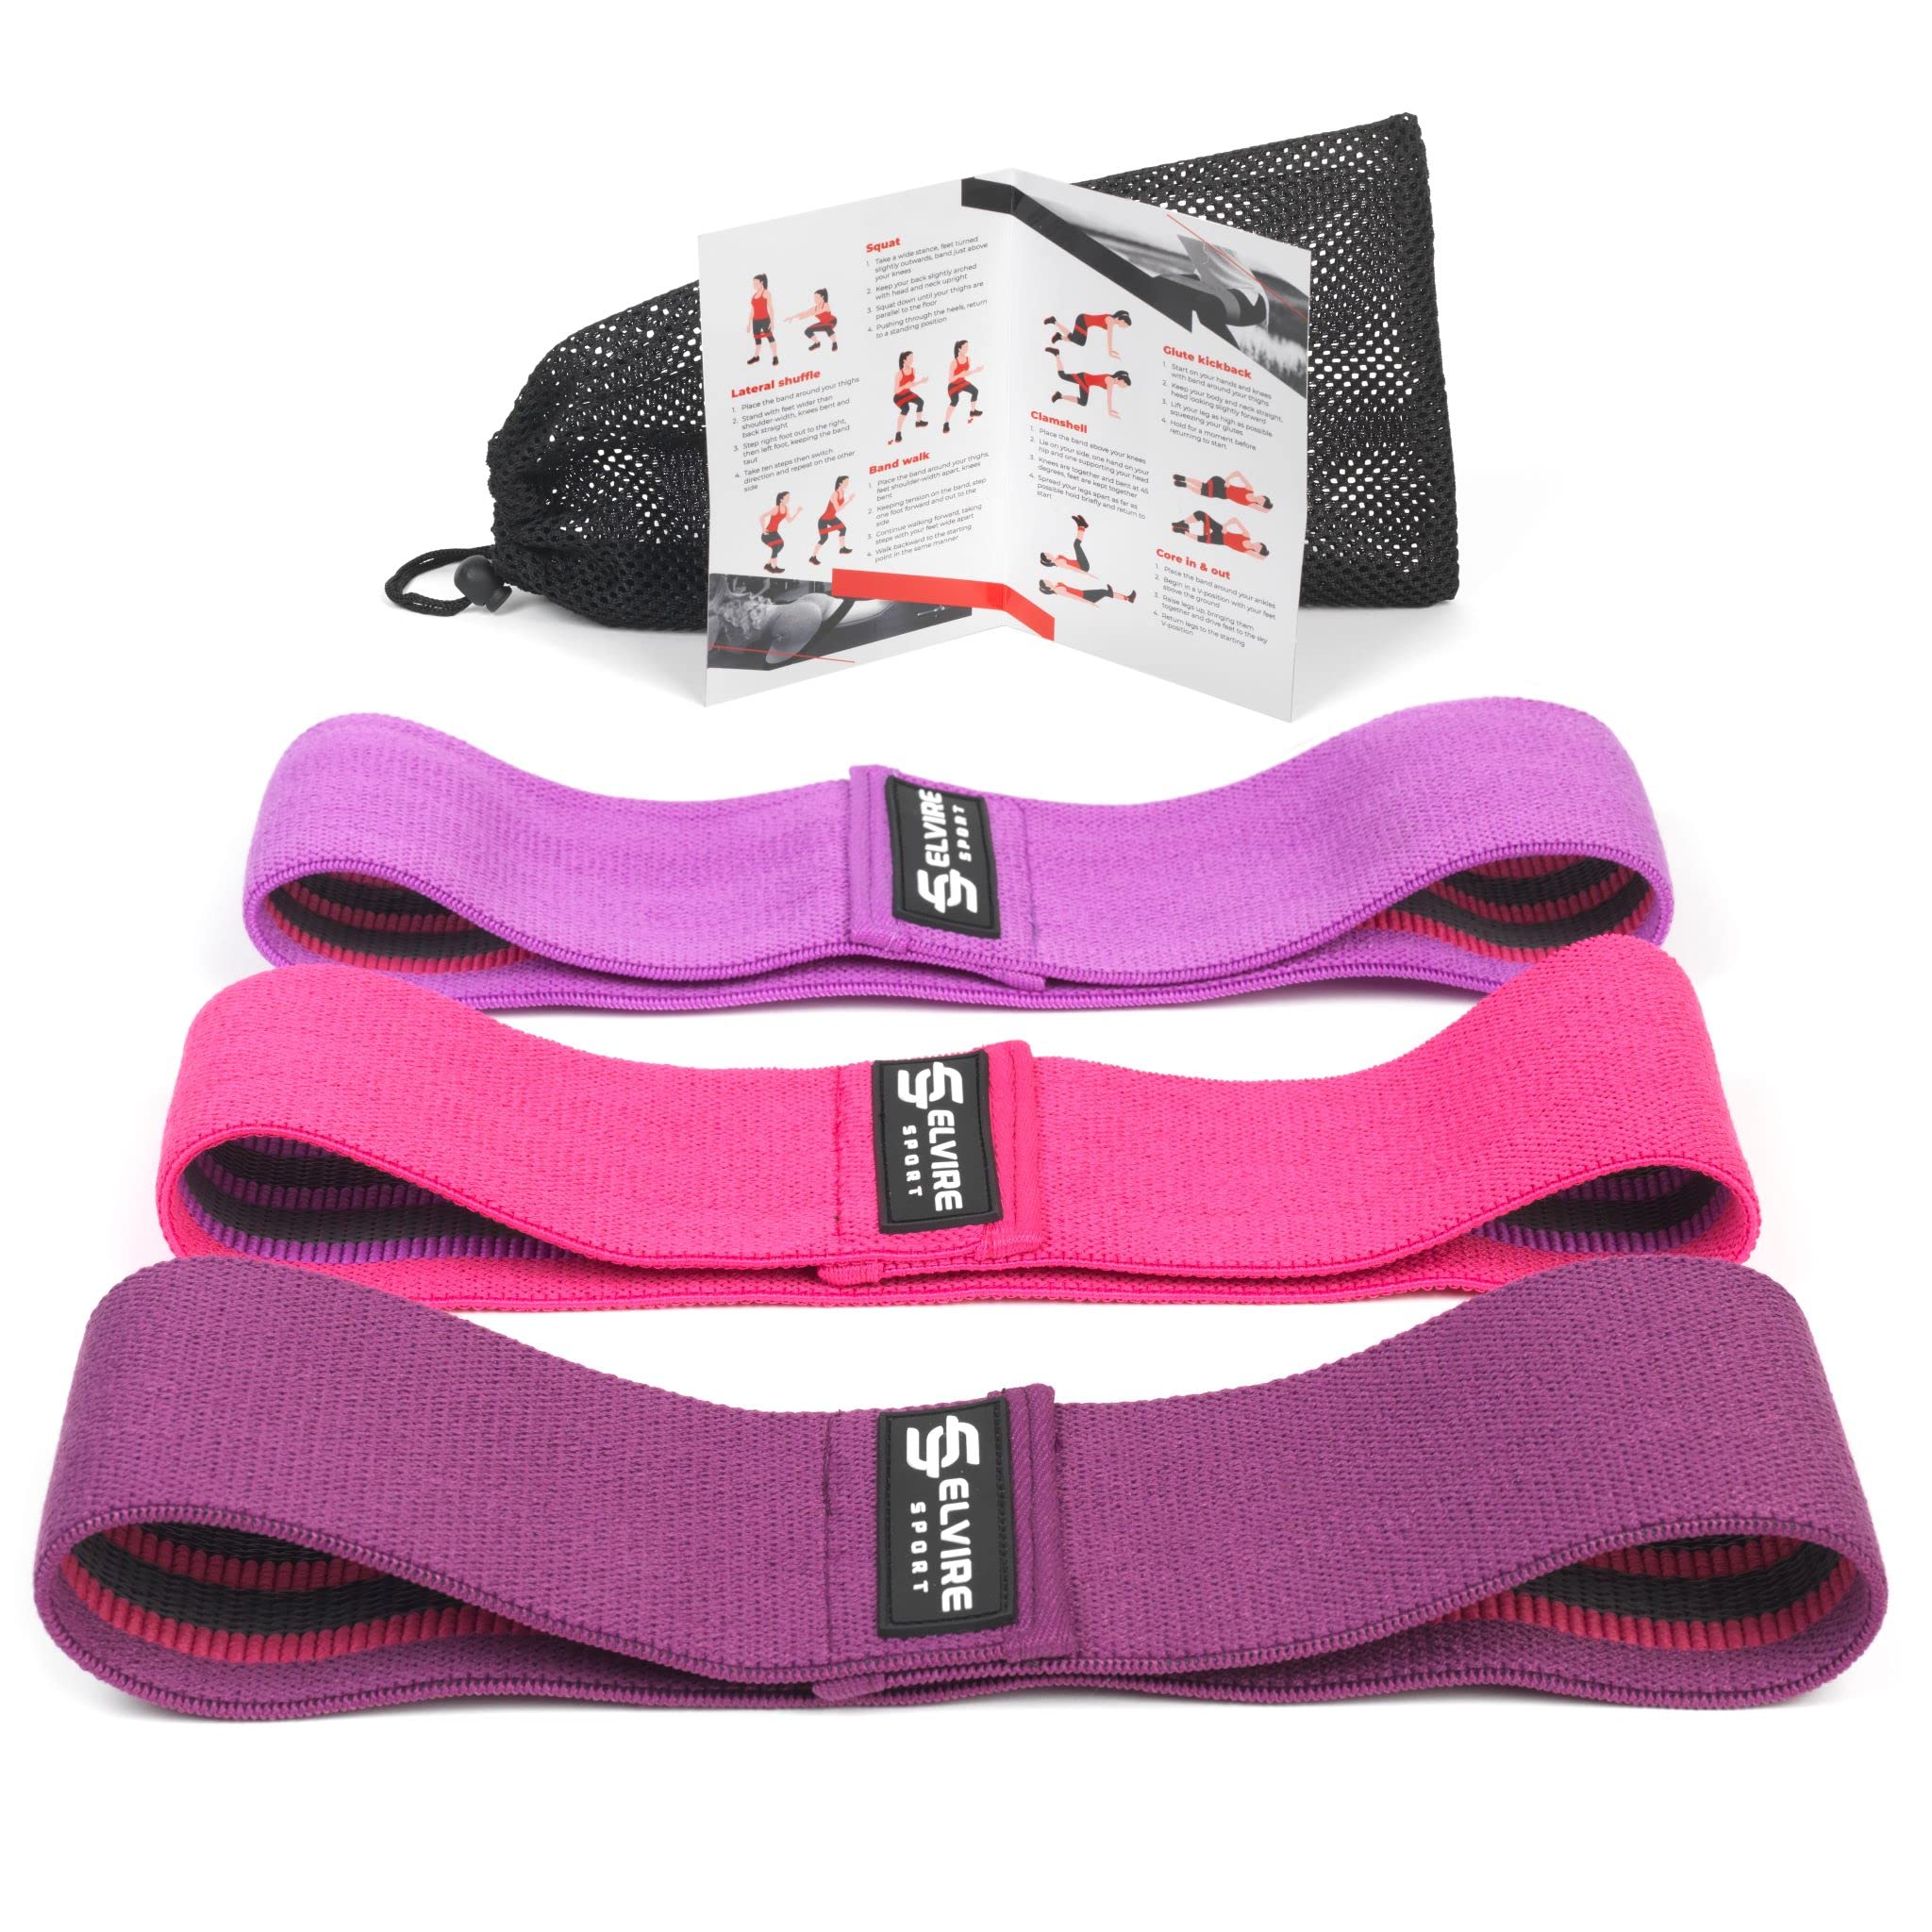 ELVIRE Fabric Resistance Bands Set. 2 Styles Available: BOOTY BANDS for Your Glutes OR LONG RESISTANCE BANDS for Full Body Workout. 3 Resistant Loop Levels. Non-Slip Exercise Bands for Women & Men